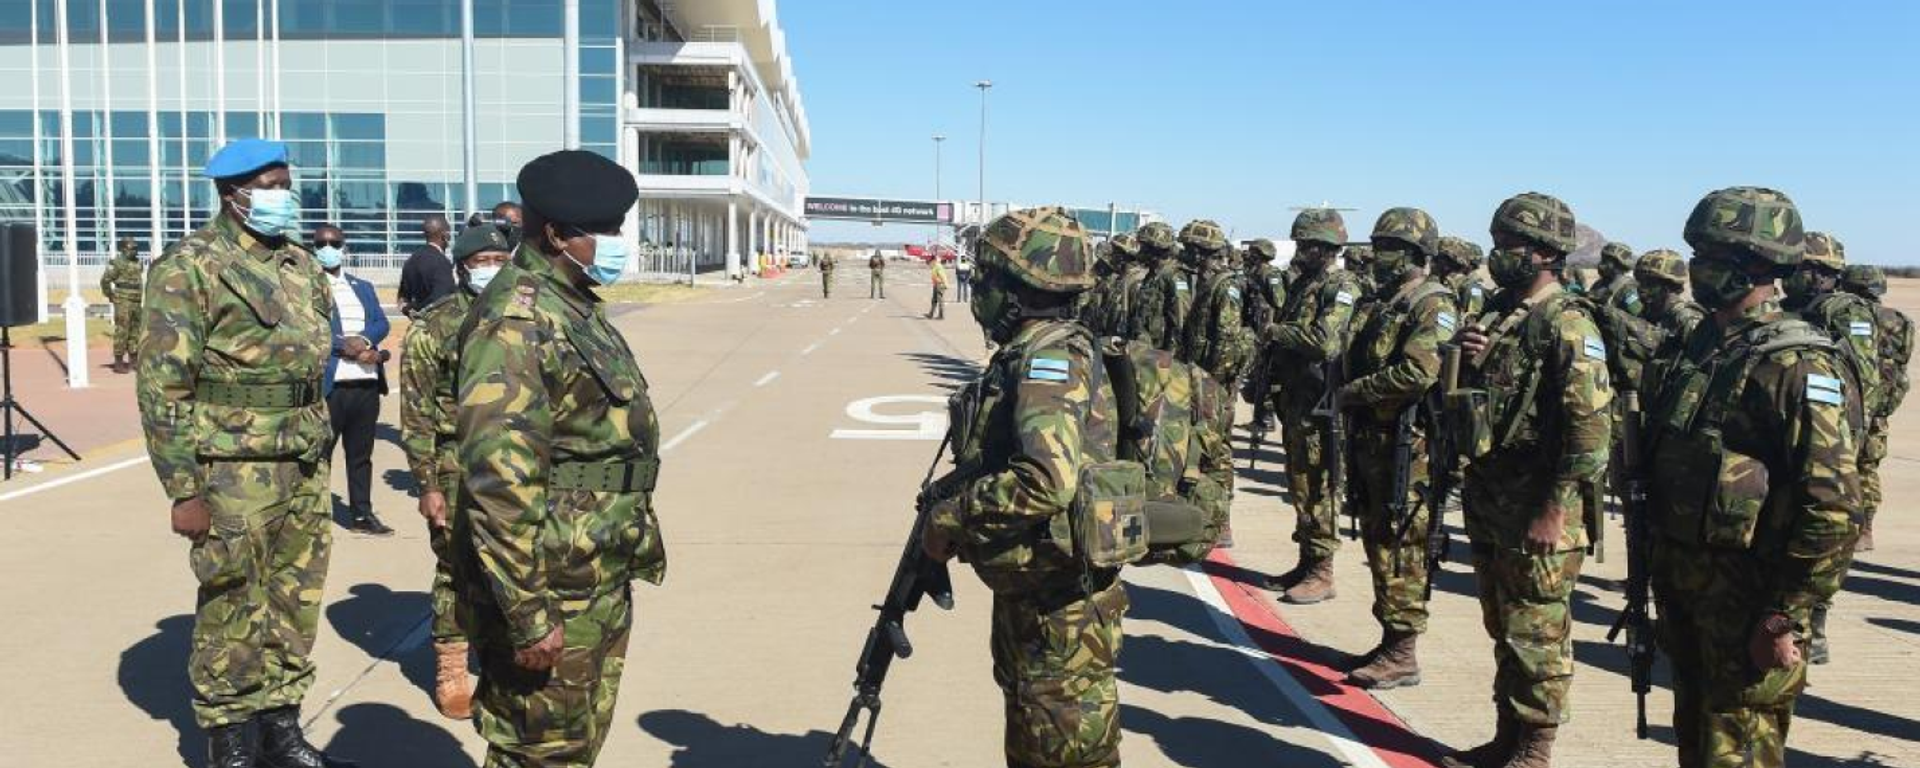 Botswana's President Mokgweetsi Masisi sends off troops to Mozambique as part of the Southern Africa Development Community (SADC) Standby Force at Sir Seretse Khama International Airport in Gaborone, Botswana, July 26, 2021. The Botswana Defence Force (BDF) will provide regional support to the Republic of Mozambique to combat the looming threat of terrorism and acts of violent extremism in the Cabo Delgado region, as an element of the SADC Mission in Mozambique. A total of 296 BDF soldiers will be deployed in Mozambique, and 70 of them departed on Monday. - Sputnik Africa, 1920, 14.12.2023